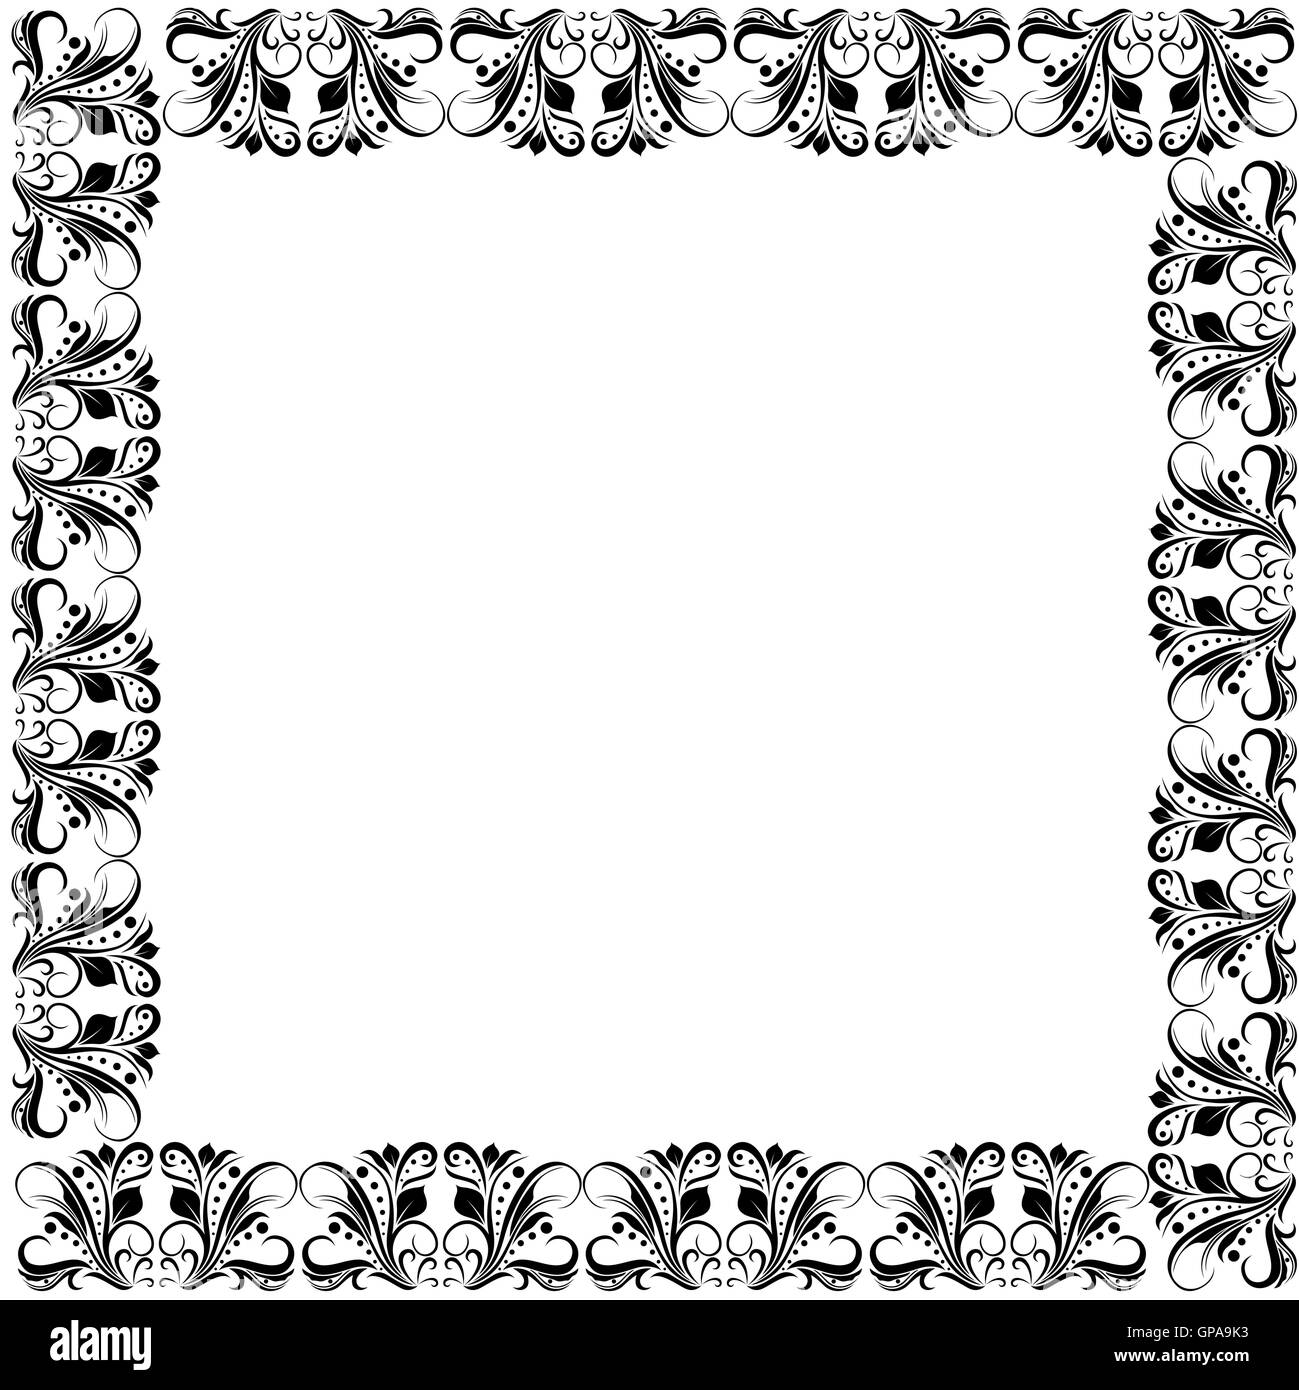 Floral ornate frame with black floral elements of leaves and flowers on the white background Stock Vector